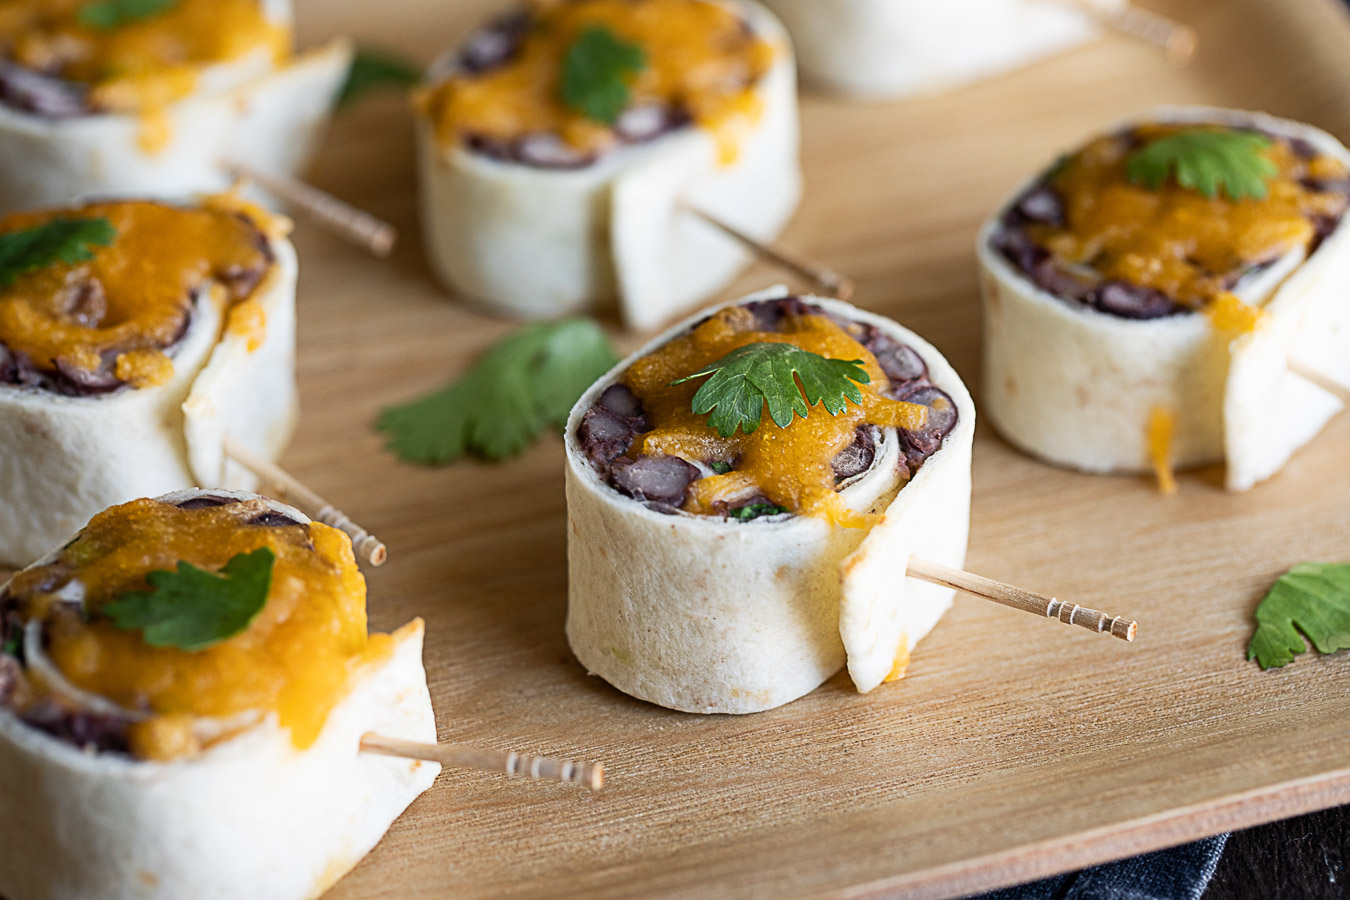 Mexican Pinwheels - Mexican Roll Ups with Black Beans - Vegetarian, Cold Mexican Appetizer